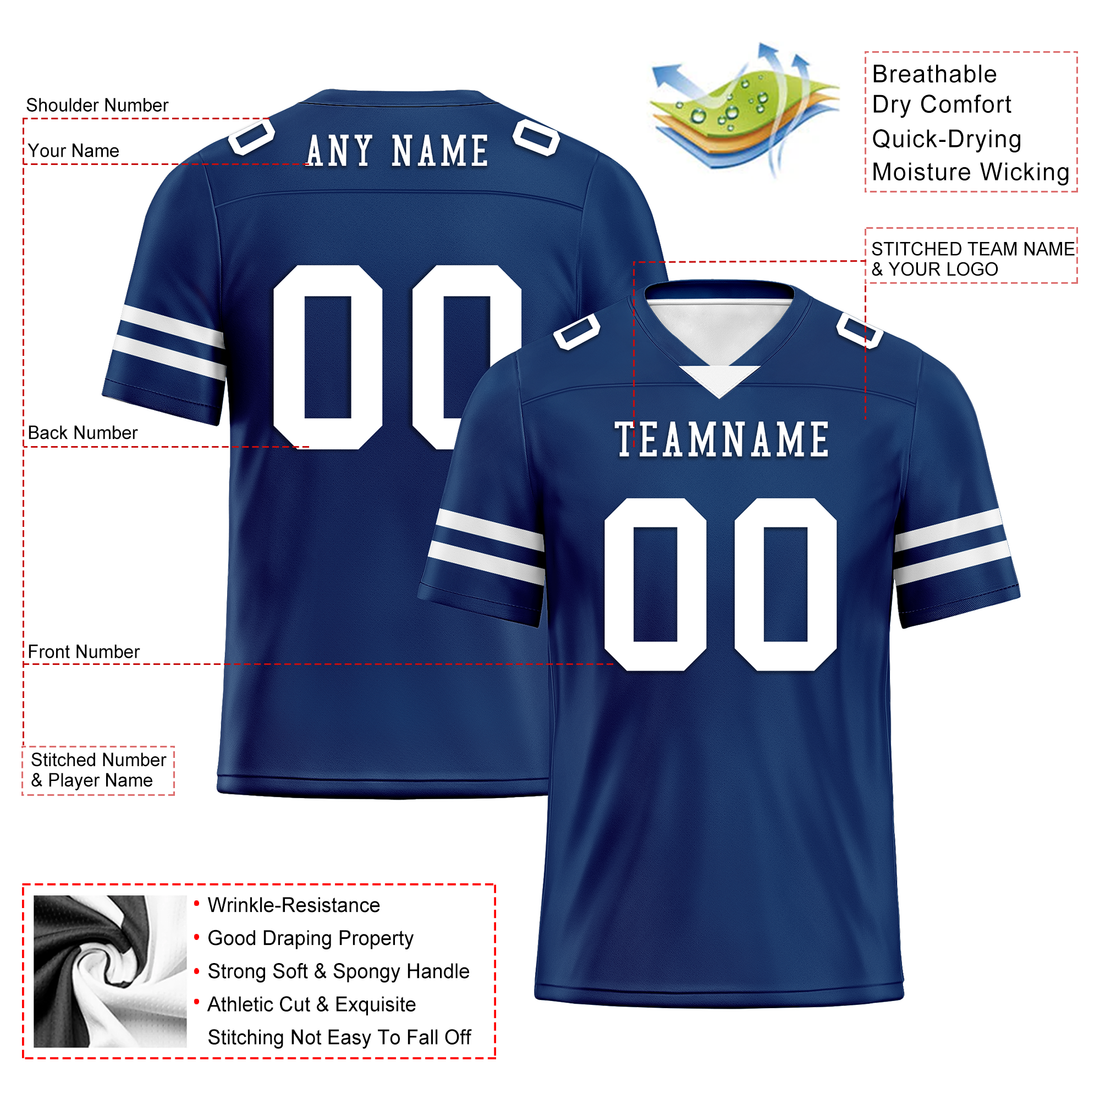 Custom Blue Classic Style Personalized Authentic Football Jersey FBJ02-bd0a70bf